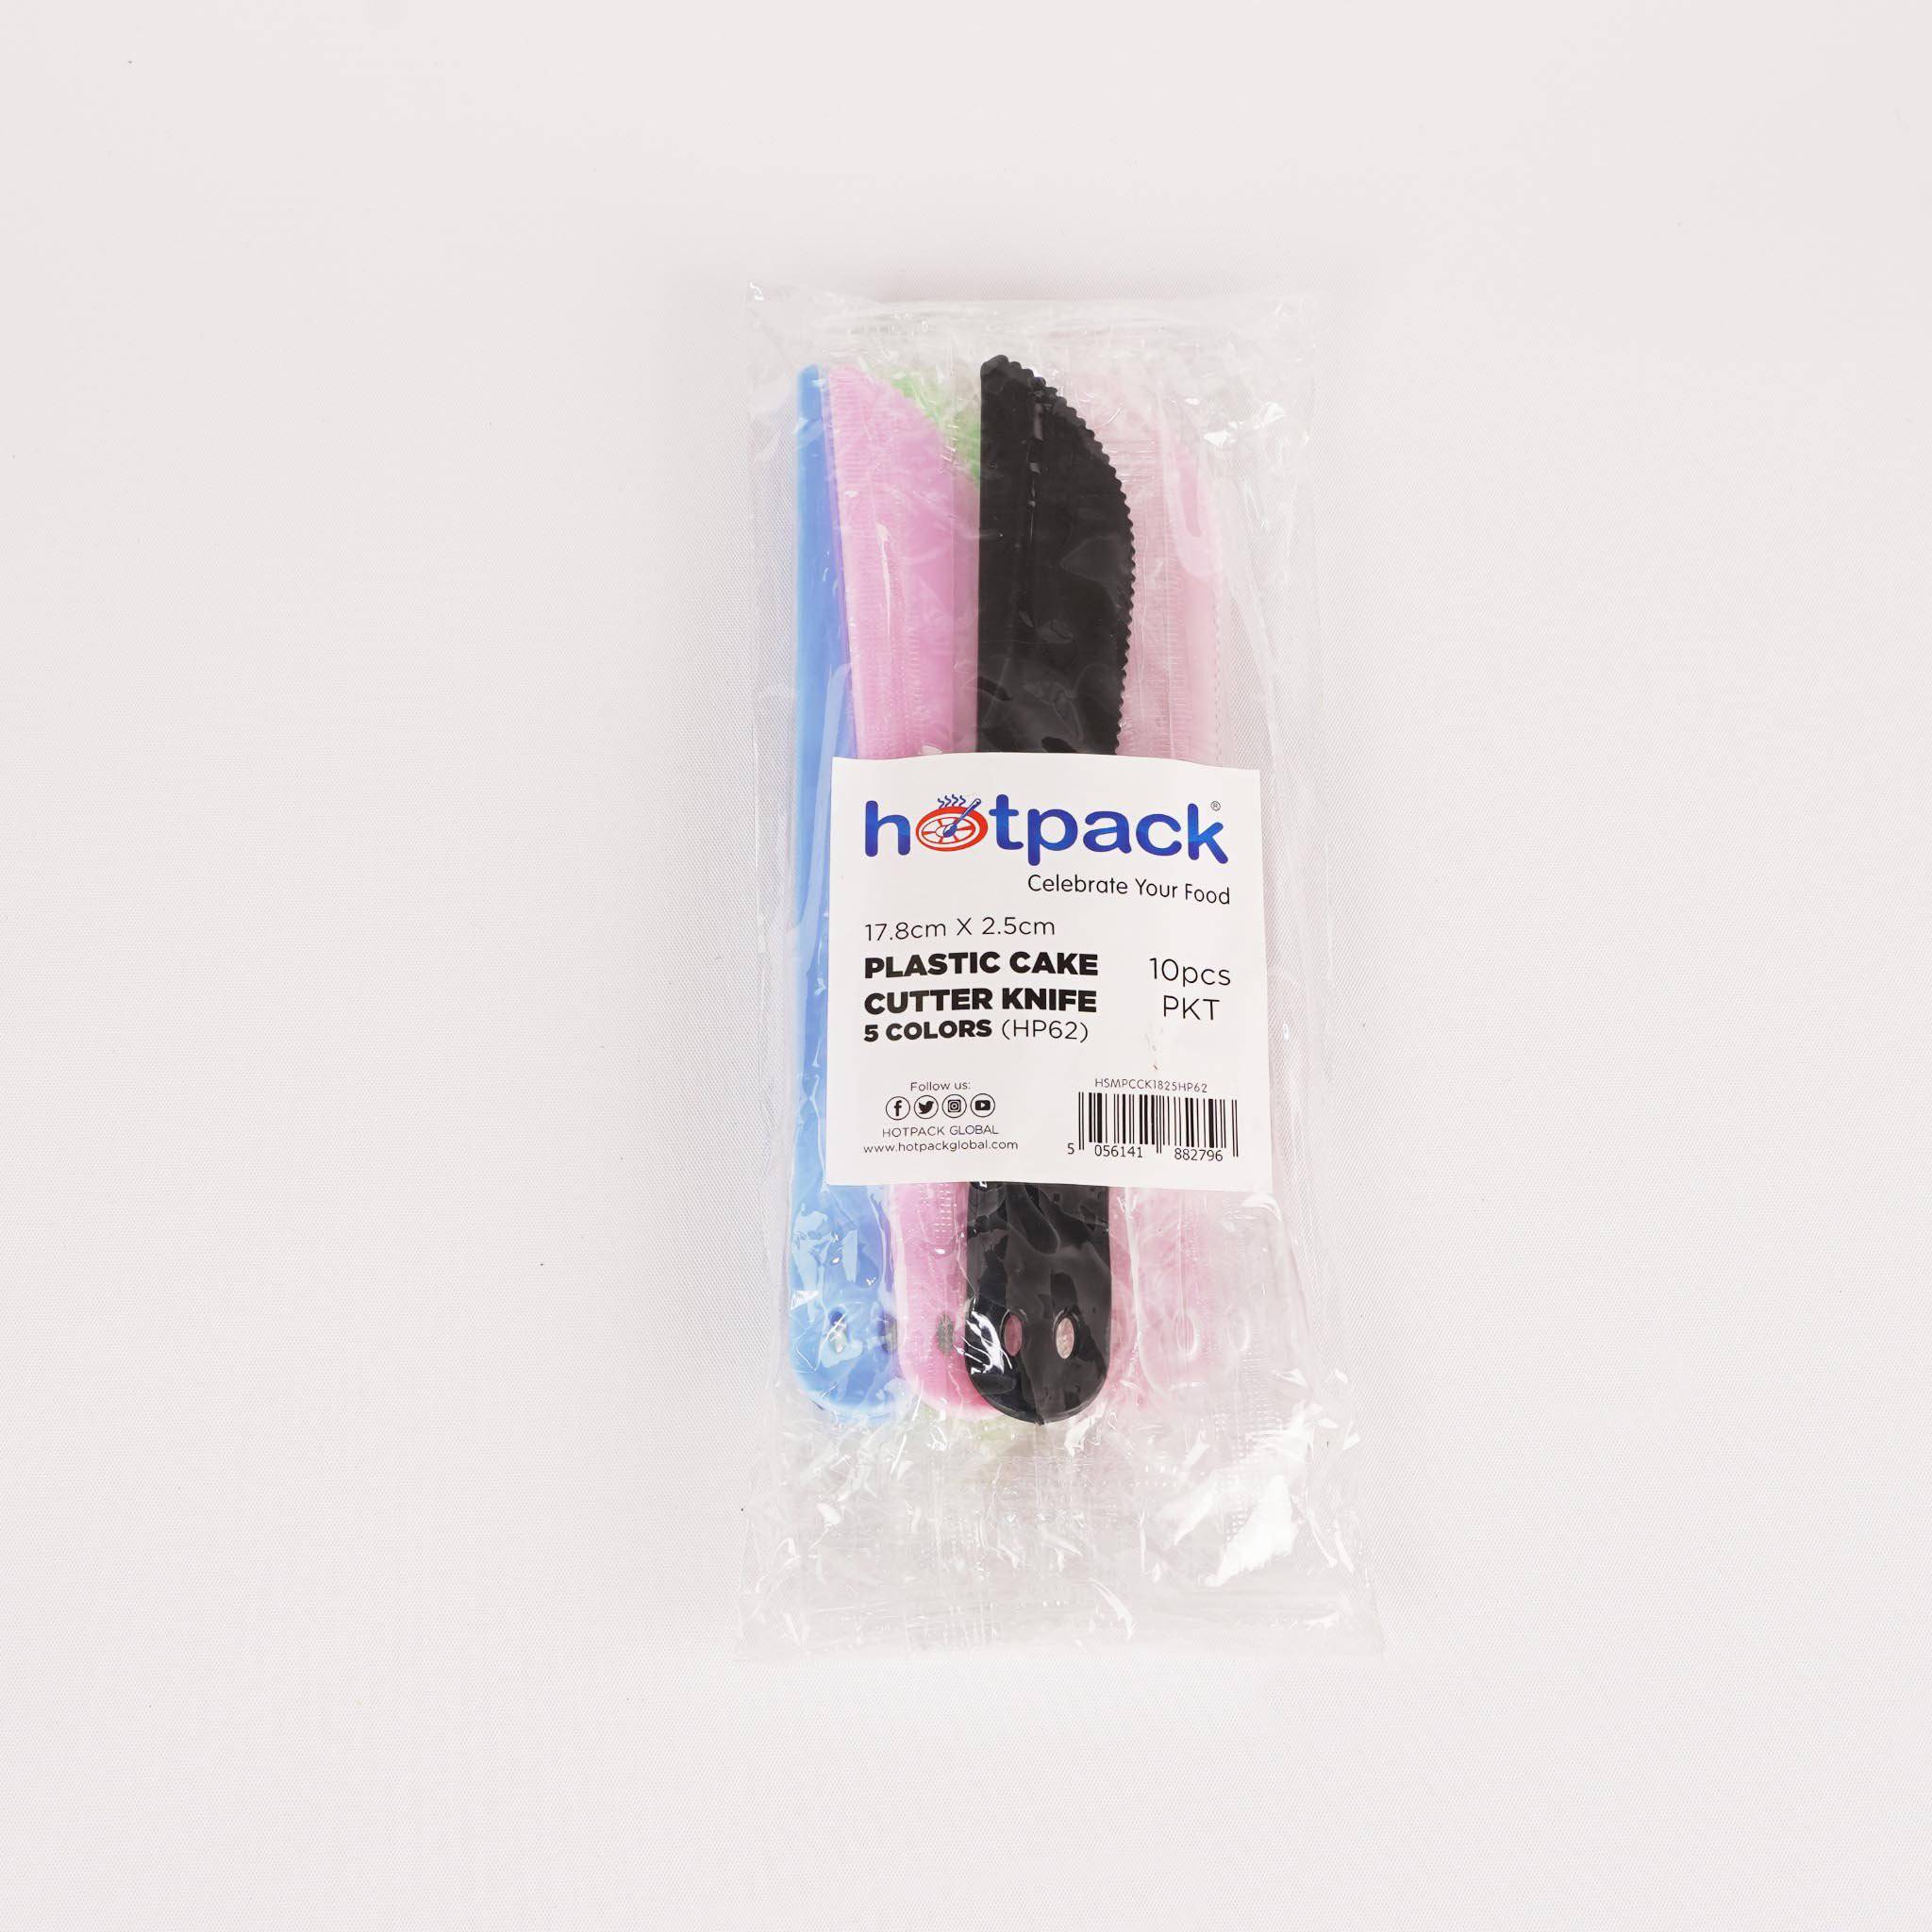 Plastic Cake Cutter Knife 5 Colors 10 Pieces - Hotpack Global